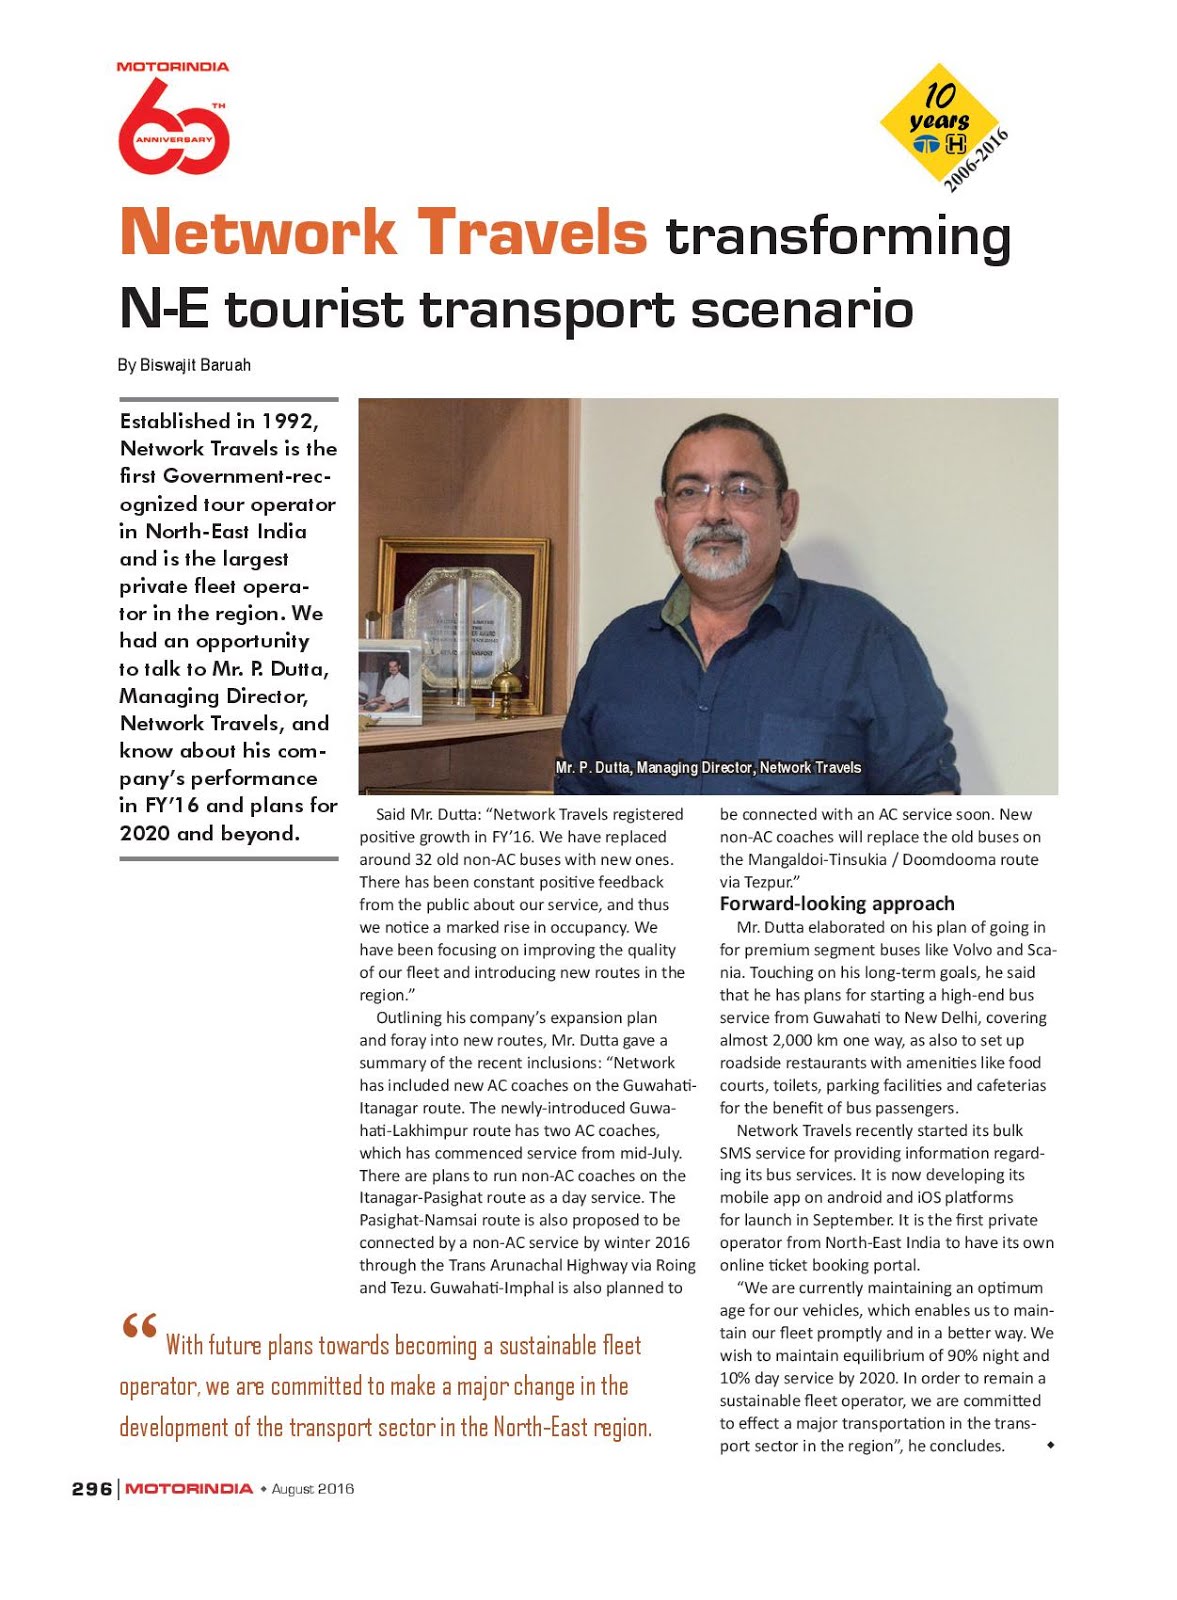 MOTOR INDIA ARTICLE 5 : NETWORK TRAVELS - 2016 ANNIVERSARY EDITION